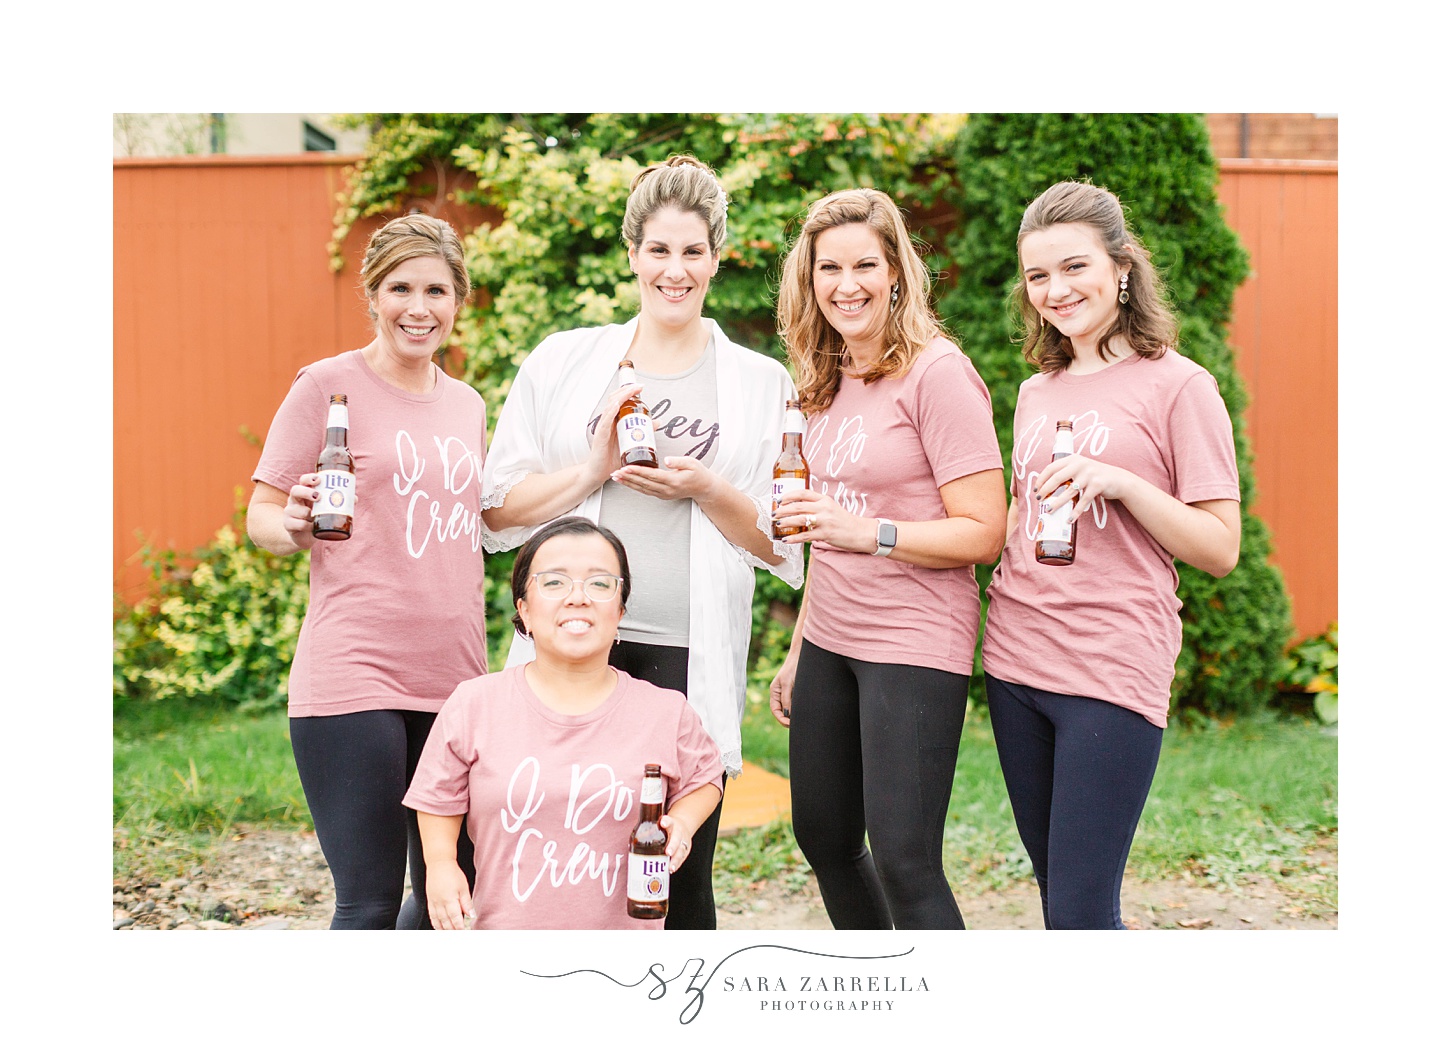 bride poses with bridesmaids in matching t-shirts